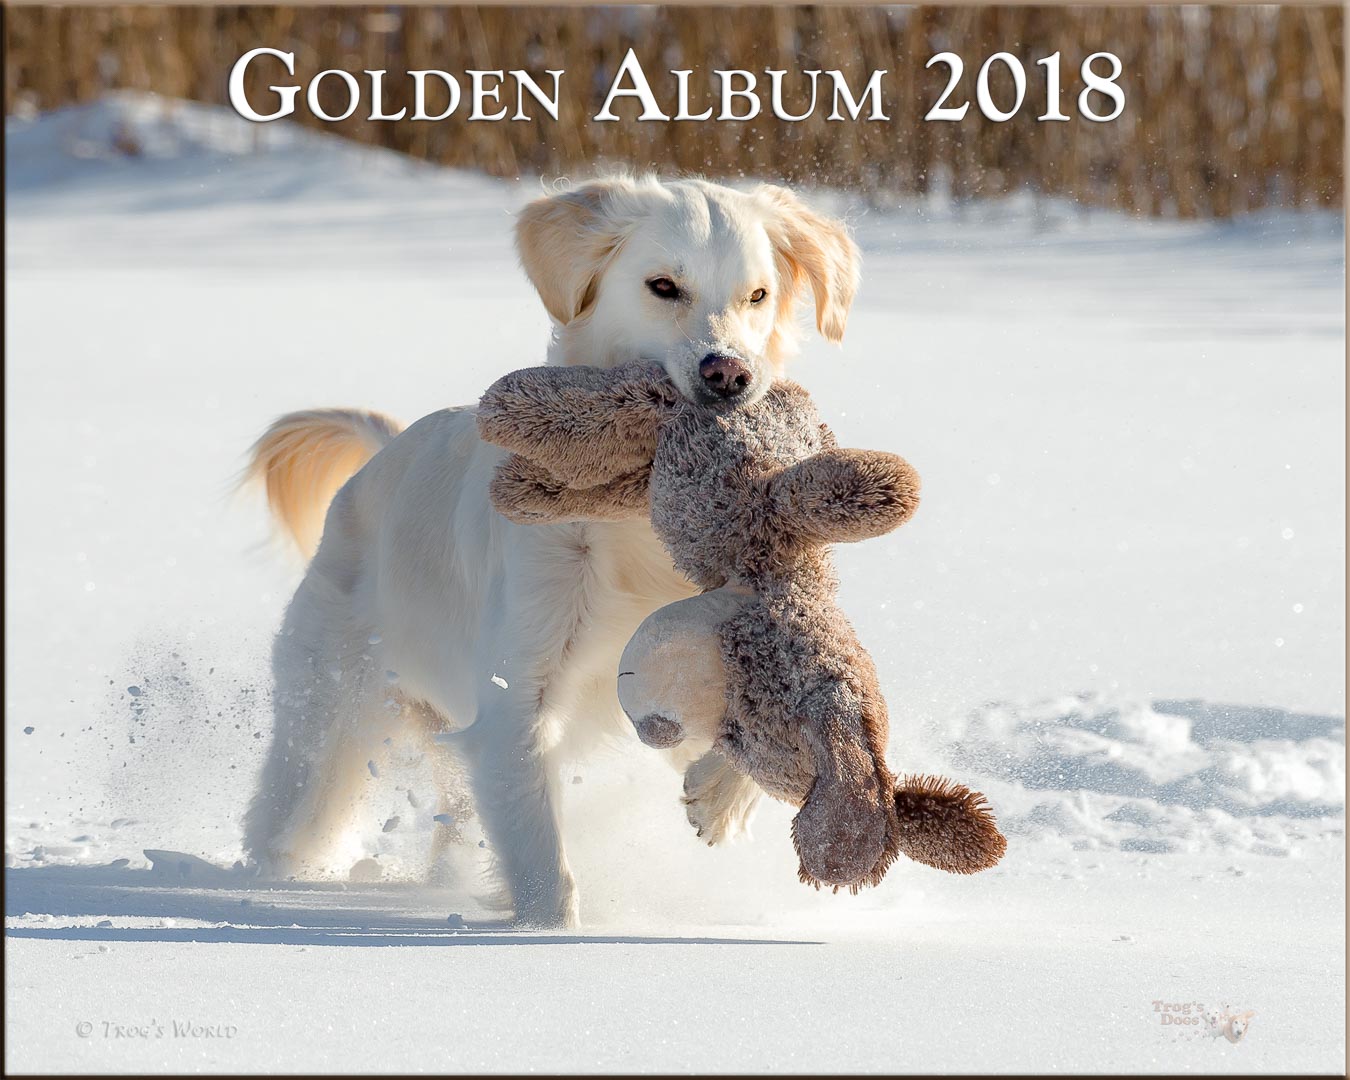 Golden Retriever in the snow with a bear